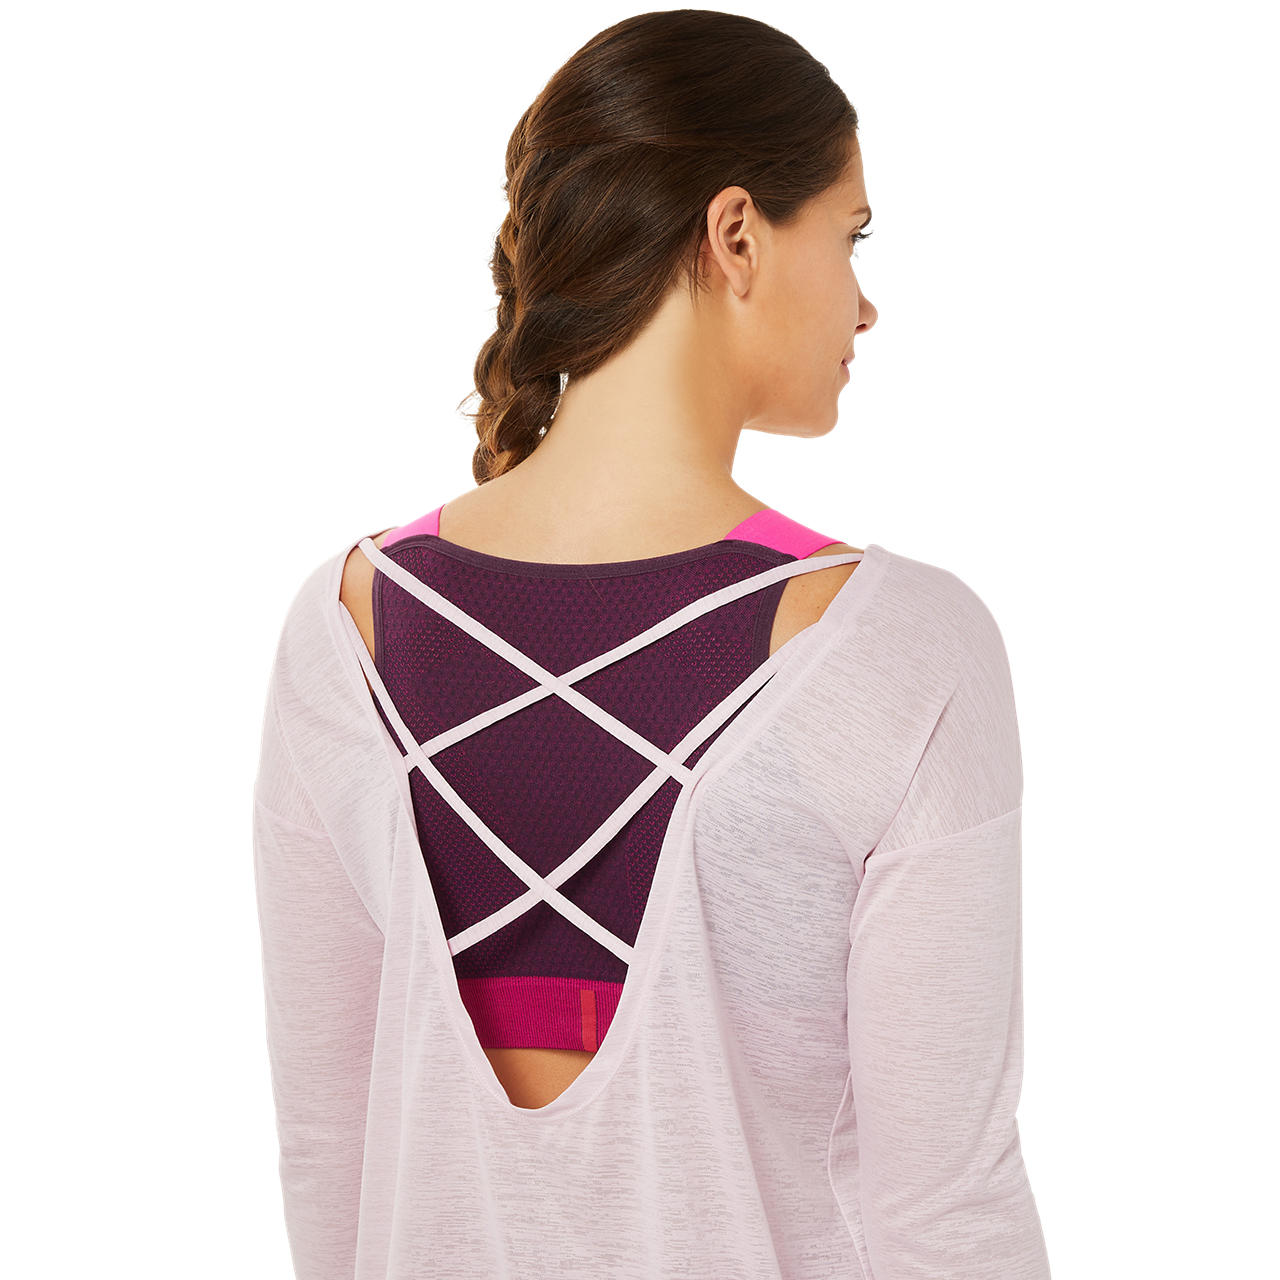 ASICS WOMEN OPEN BACK LS TOP image number null